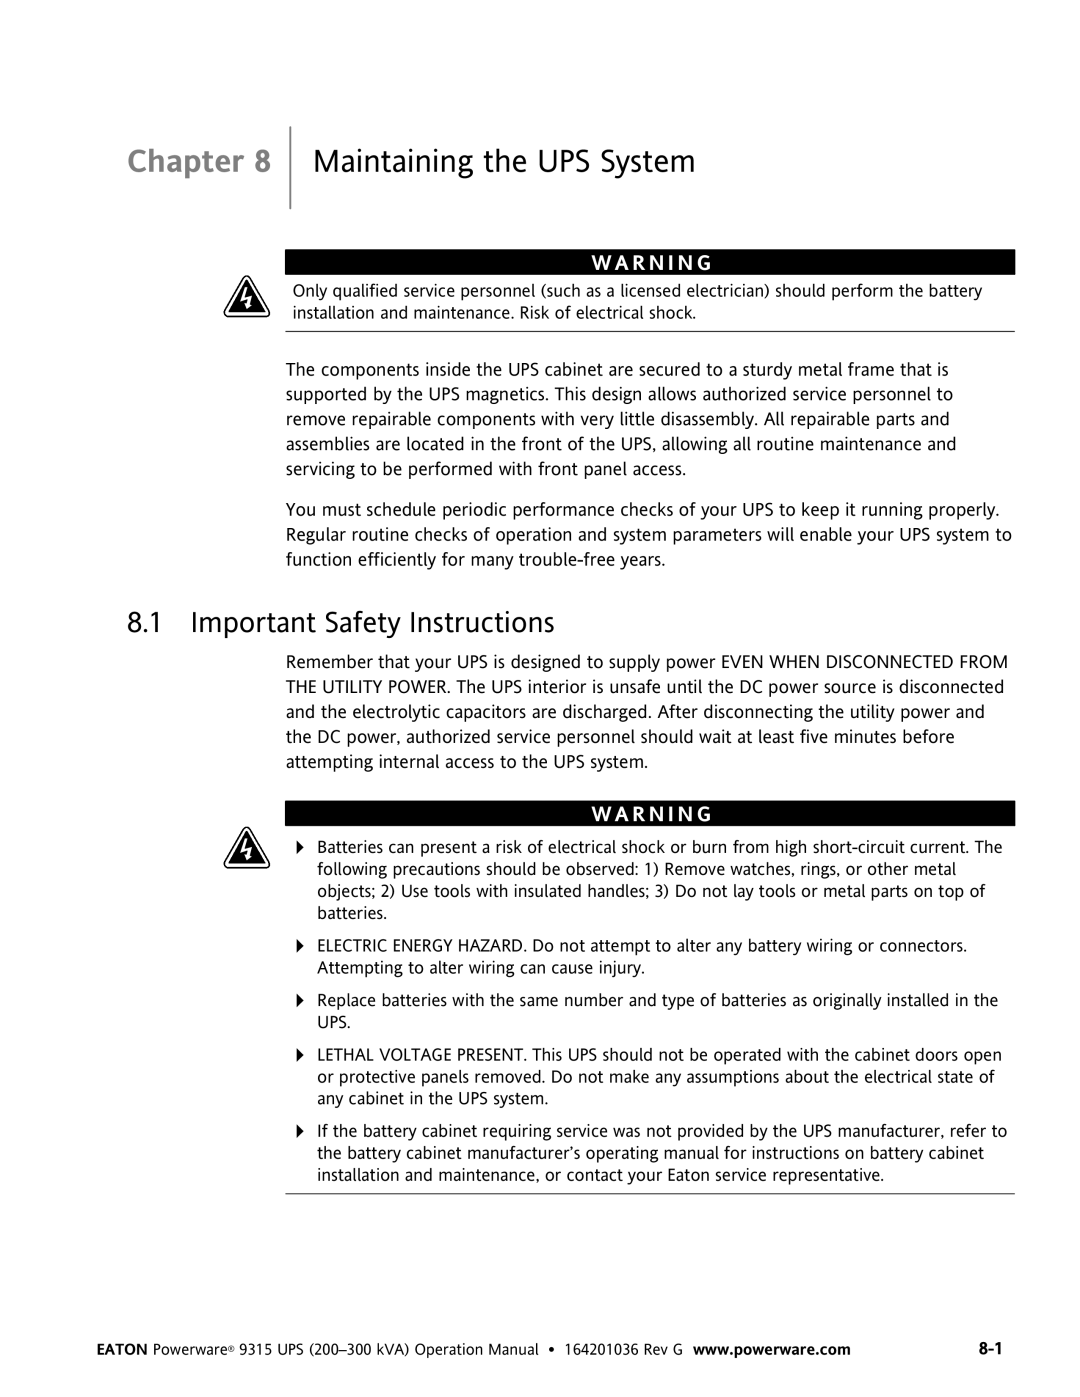 Powerware 9315 UPS operation manual Maintaining the UPS System, Important Safety Instructions 